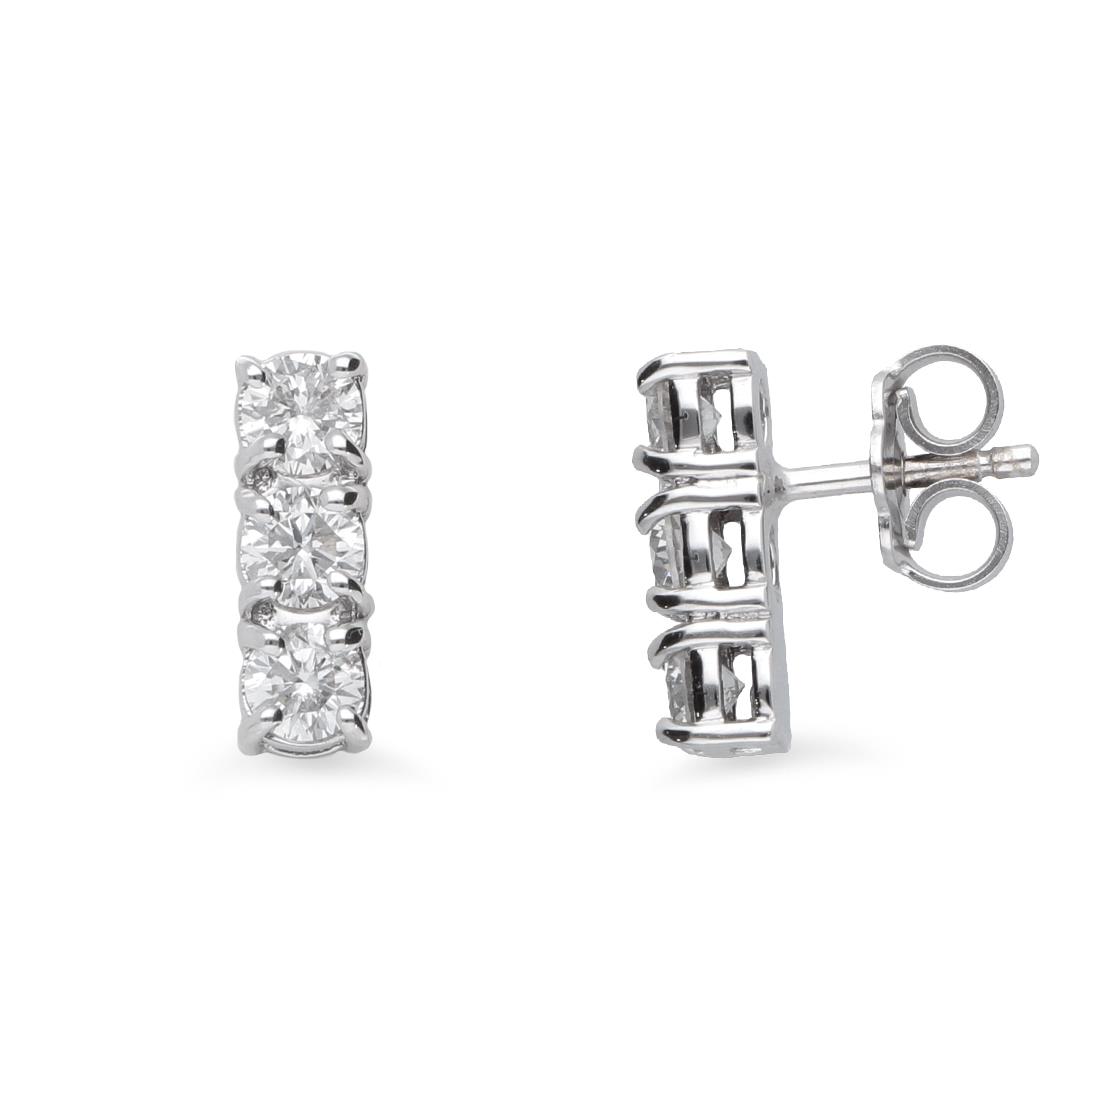 Trilogy earrings in white gold with 0.52 ct diamonds - ORO&CO